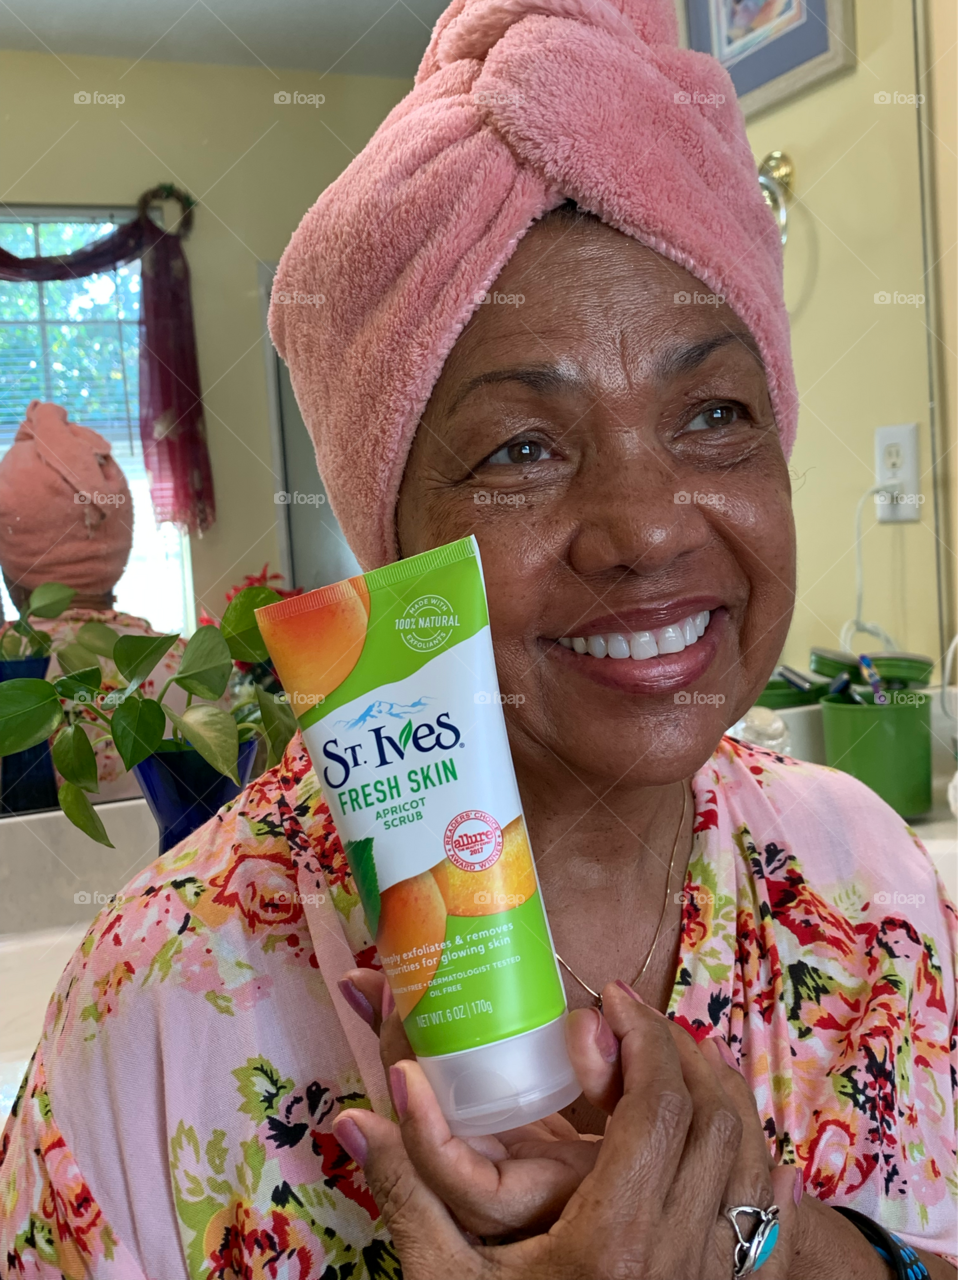 St. Ives Apricot Facial Scrub is great for any skin type, it removes dead skin, helps prevent breakouts. 100% Natural Exfoliants. Great product and also gentle on the skin.